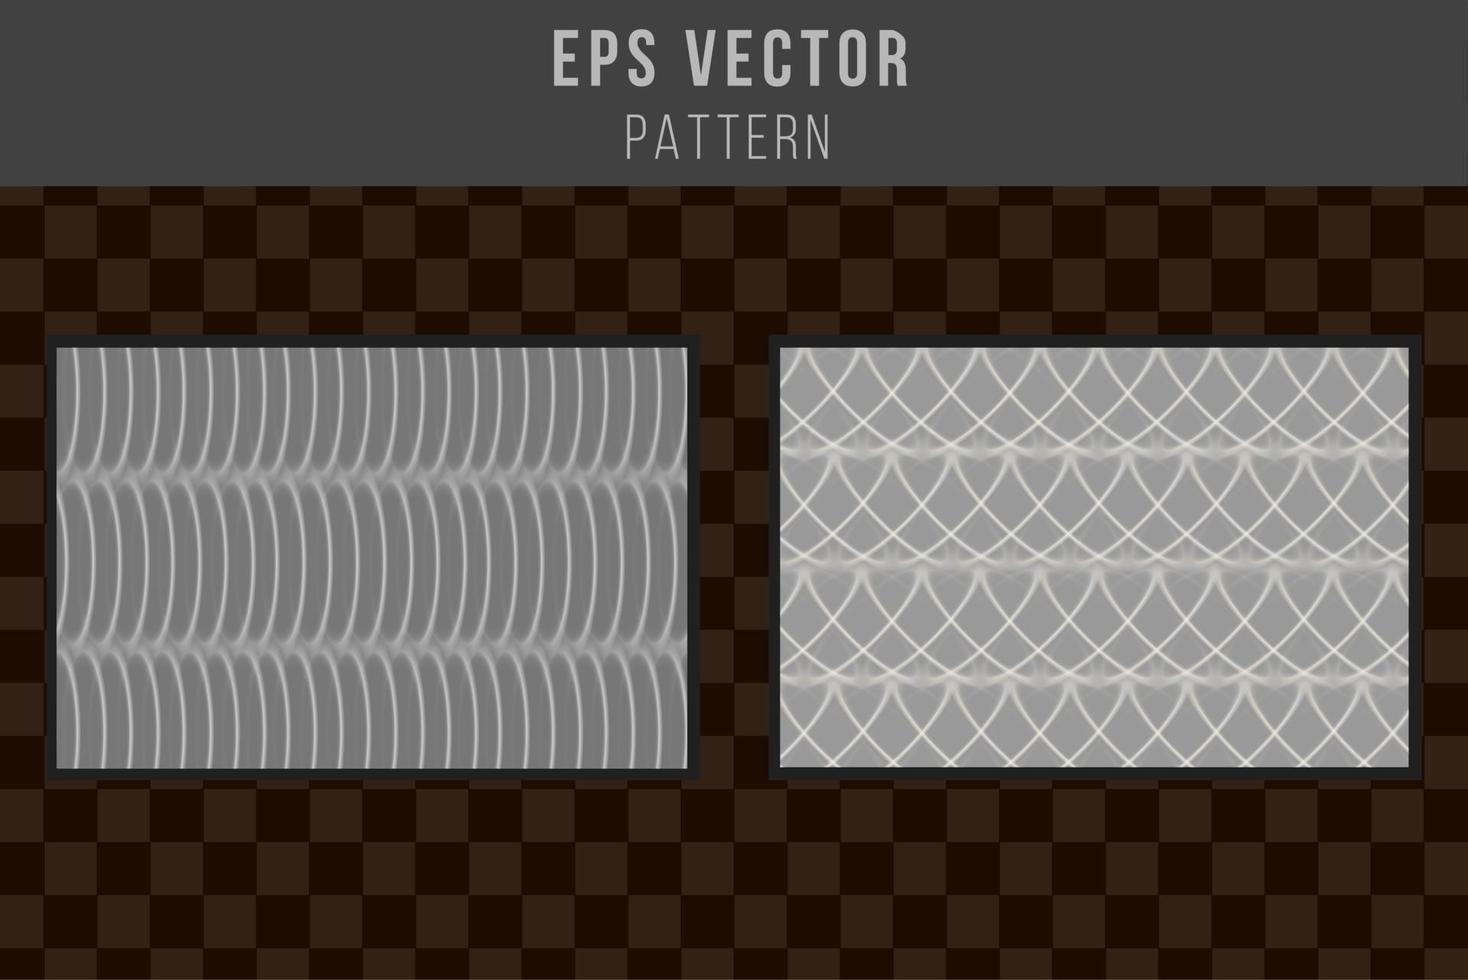 Set of grayscale seamless pattern black and white eps vector editable